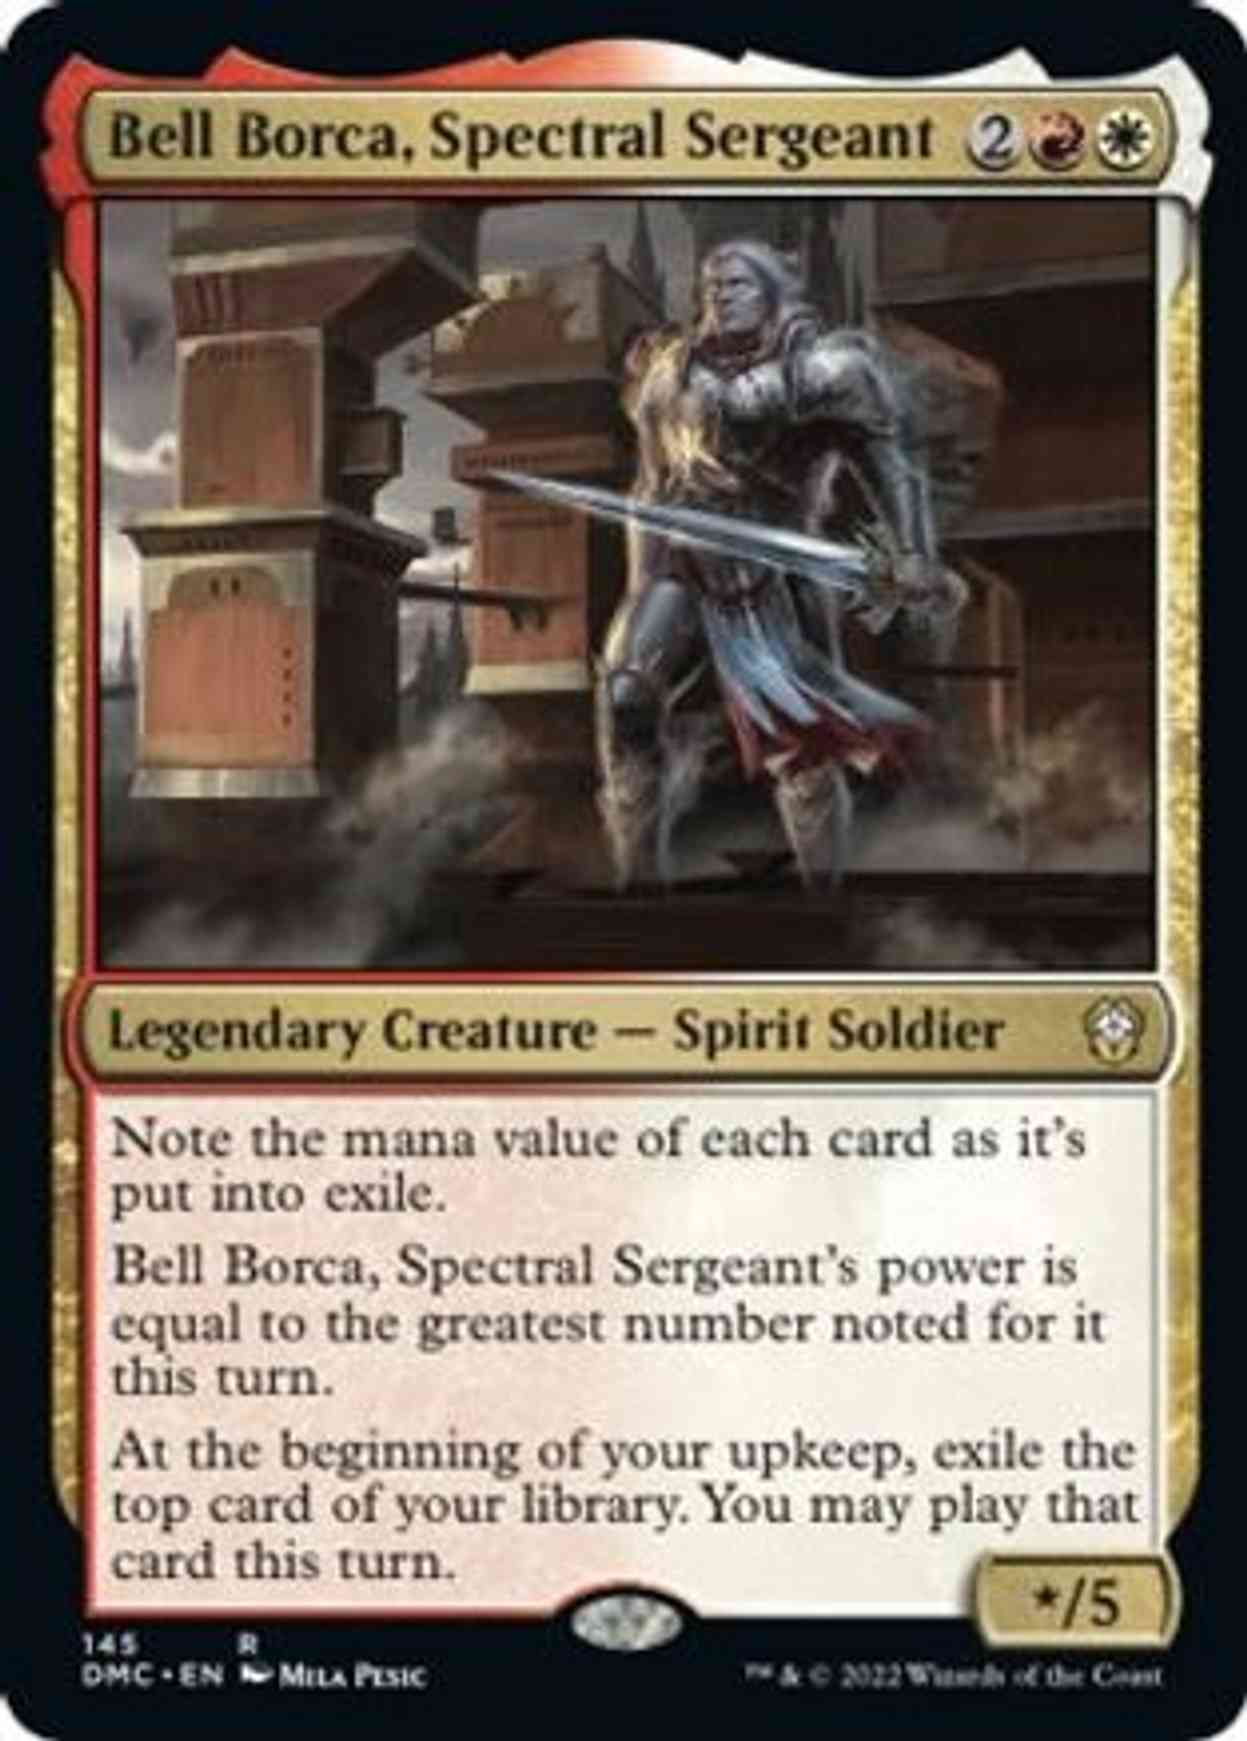 Bell Borca, Spectral Sergeant magic card front